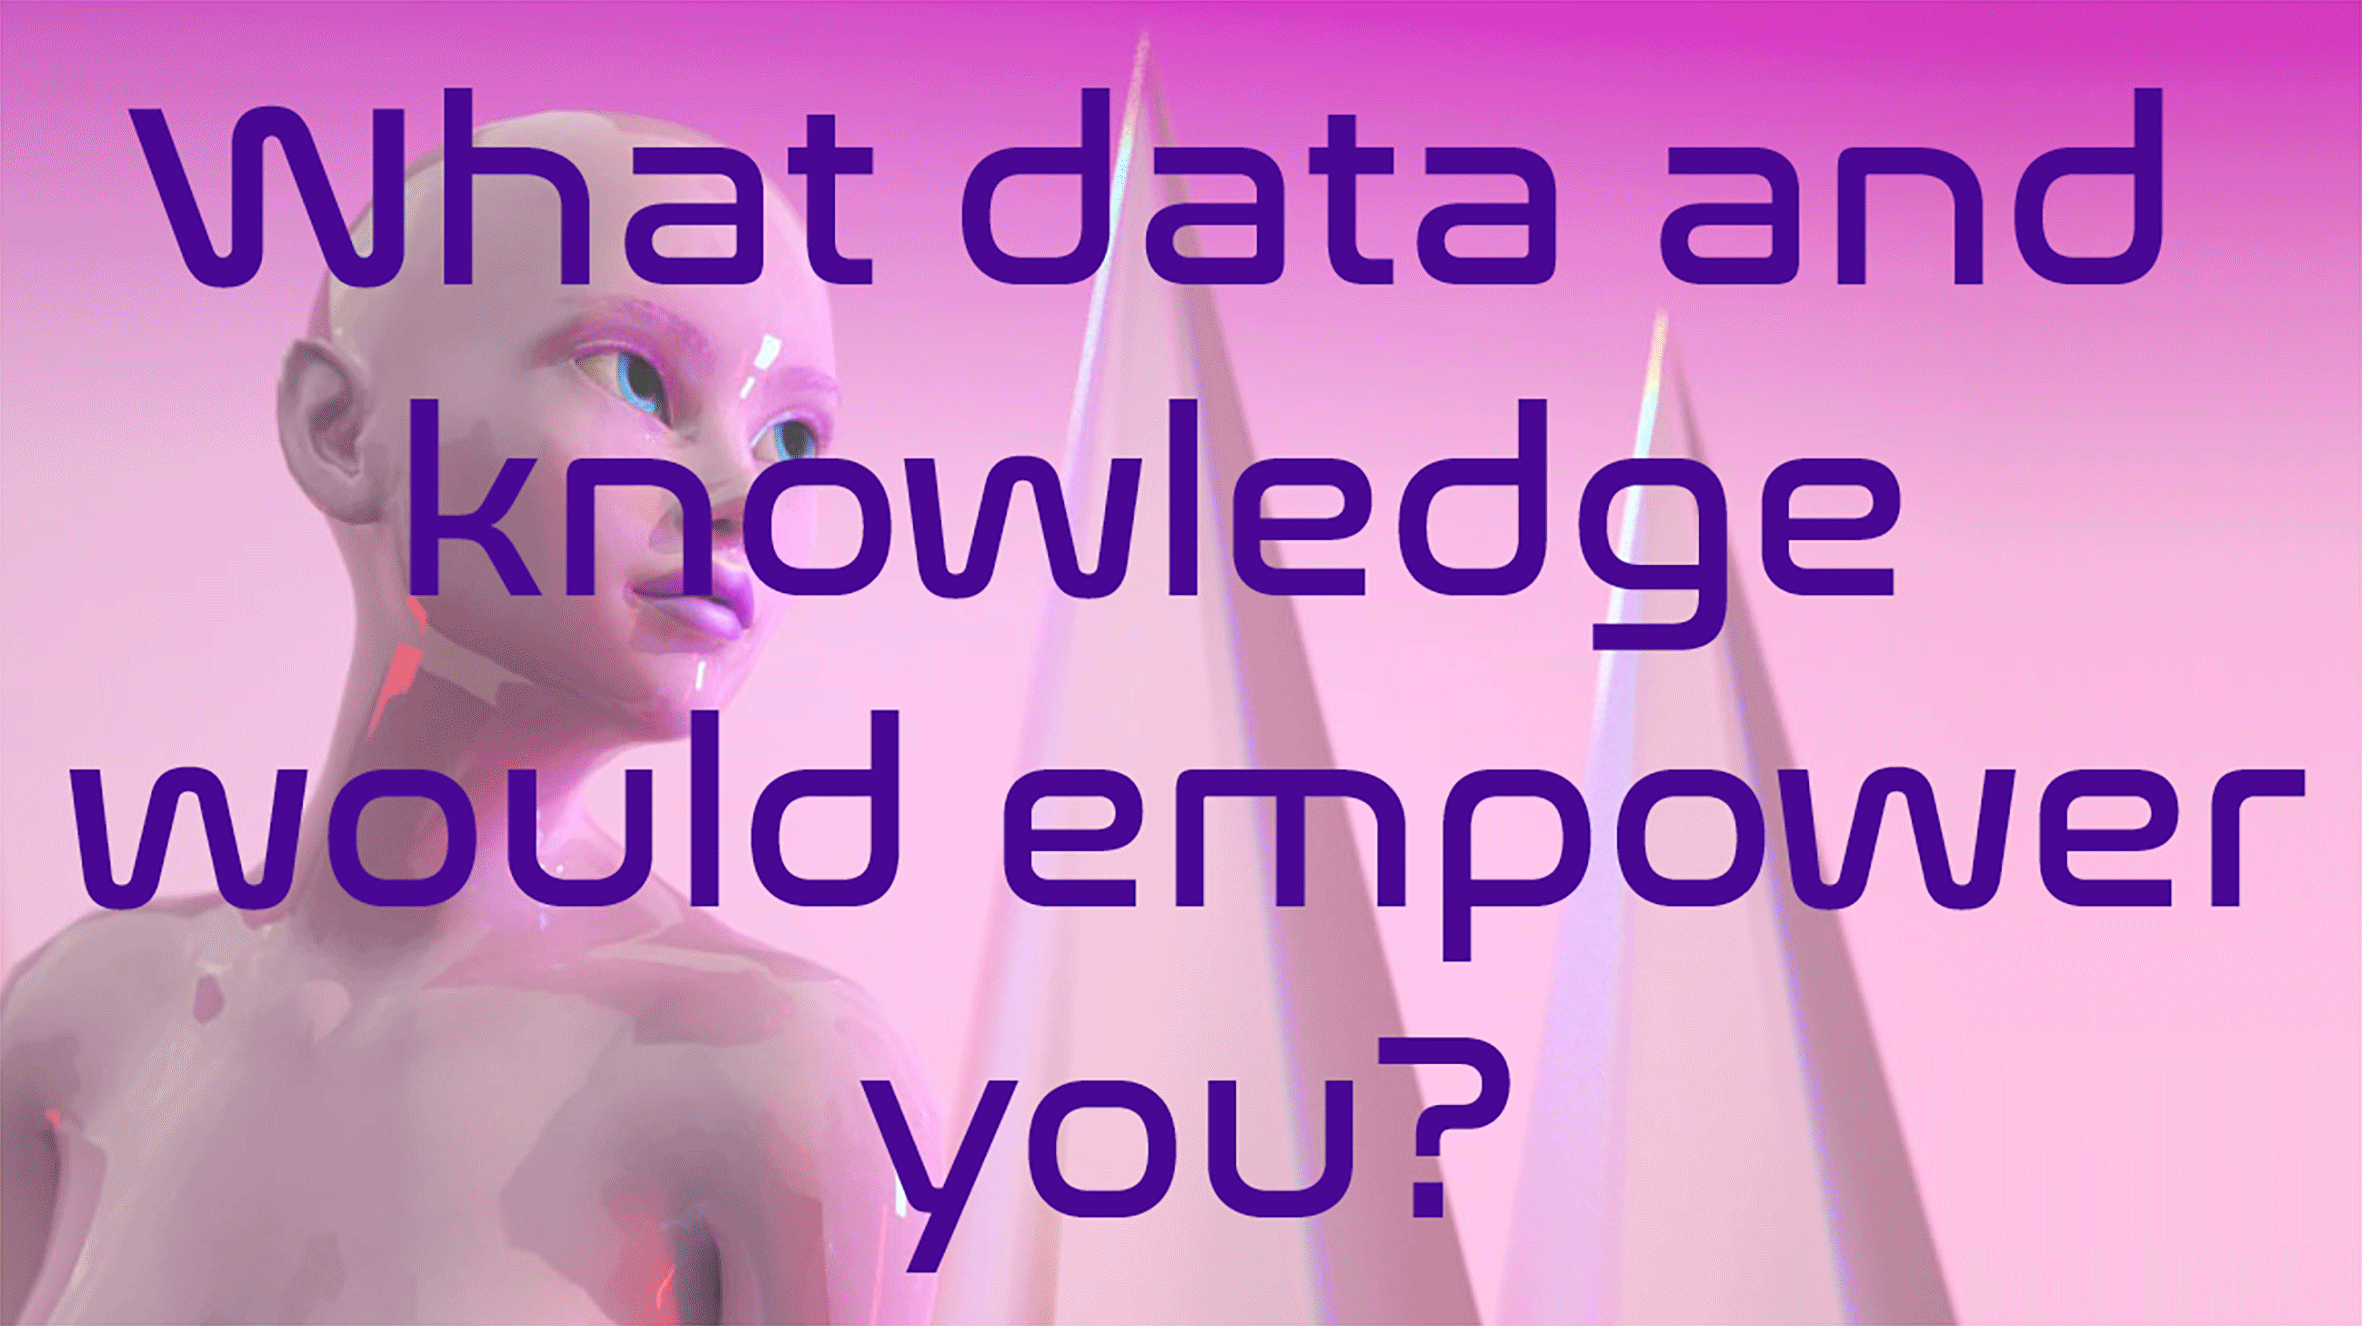 Text based animated GIF containing Q What data and knowledge would empower you